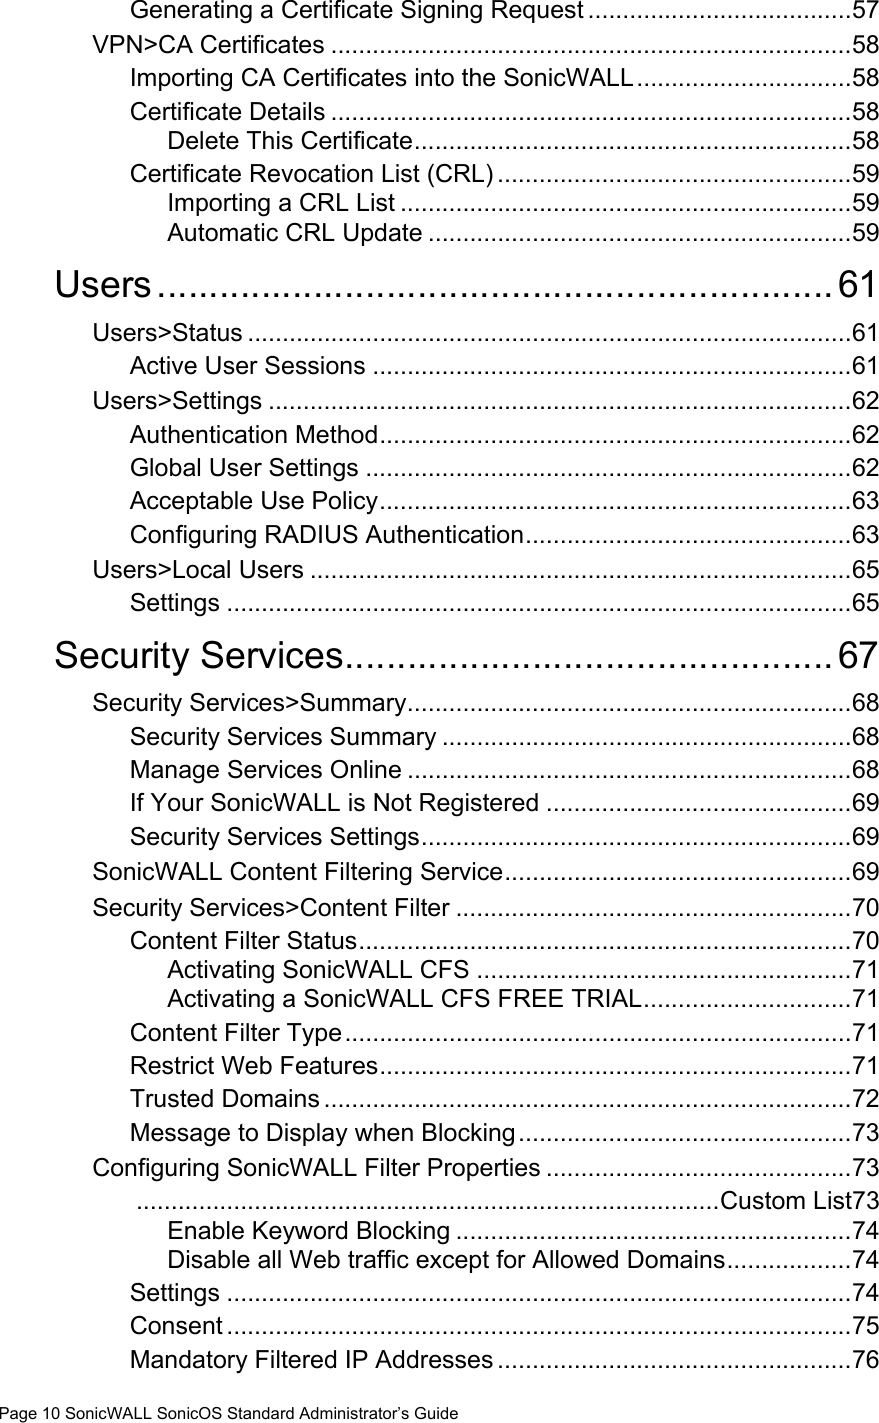 Page 10 SonicWALL SonicOS Standard Administrator’s GuideGenerating a Certificate Signing Request ......................................57VPN&gt;CA Certificates ...........................................................................58Importing CA Certificates into the SonicWALL...............................58Certificate Details ...........................................................................58Delete This Certificate...............................................................58Certificate Revocation List (CRL) ...................................................59Importing a CRL List .................................................................59Automatic CRL Update .............................................................59Users................................................................. 61Users&gt;Status .......................................................................................61Active User Sessions .....................................................................61Users&gt;Settings ....................................................................................62Authentication Method....................................................................62Global User Settings ......................................................................62Acceptable Use Policy....................................................................63Configuring RADIUS Authentication...............................................63Users&gt;Local Users ..............................................................................65Settings ..........................................................................................65Security Services...............................................67Security Services&gt;Summary................................................................68Security Services Summary ...........................................................68Manage Services Online ................................................................68If Your SonicWALL is Not Registered ............................................69Security Services Settings..............................................................69SonicWALL Content Filtering Service..................................................69Security Services&gt;Content Filter .........................................................70Content Filter Status.......................................................................70Activating SonicWALL CFS ......................................................71Activating a SonicWALL CFS FREE TRIAL..............................71Content Filter Type.........................................................................71Restrict Web Features....................................................................71Trusted Domains ............................................................................72Message to Display when Blocking................................................73Configuring SonicWALL Filter Properties ............................................73....................................................................................Custom List73Enable Keyword Blocking .........................................................74Disable all Web traffic except for Allowed Domains..................74Settings ..........................................................................................74Consent ..........................................................................................75Mandatory Filtered IP Addresses ...................................................76